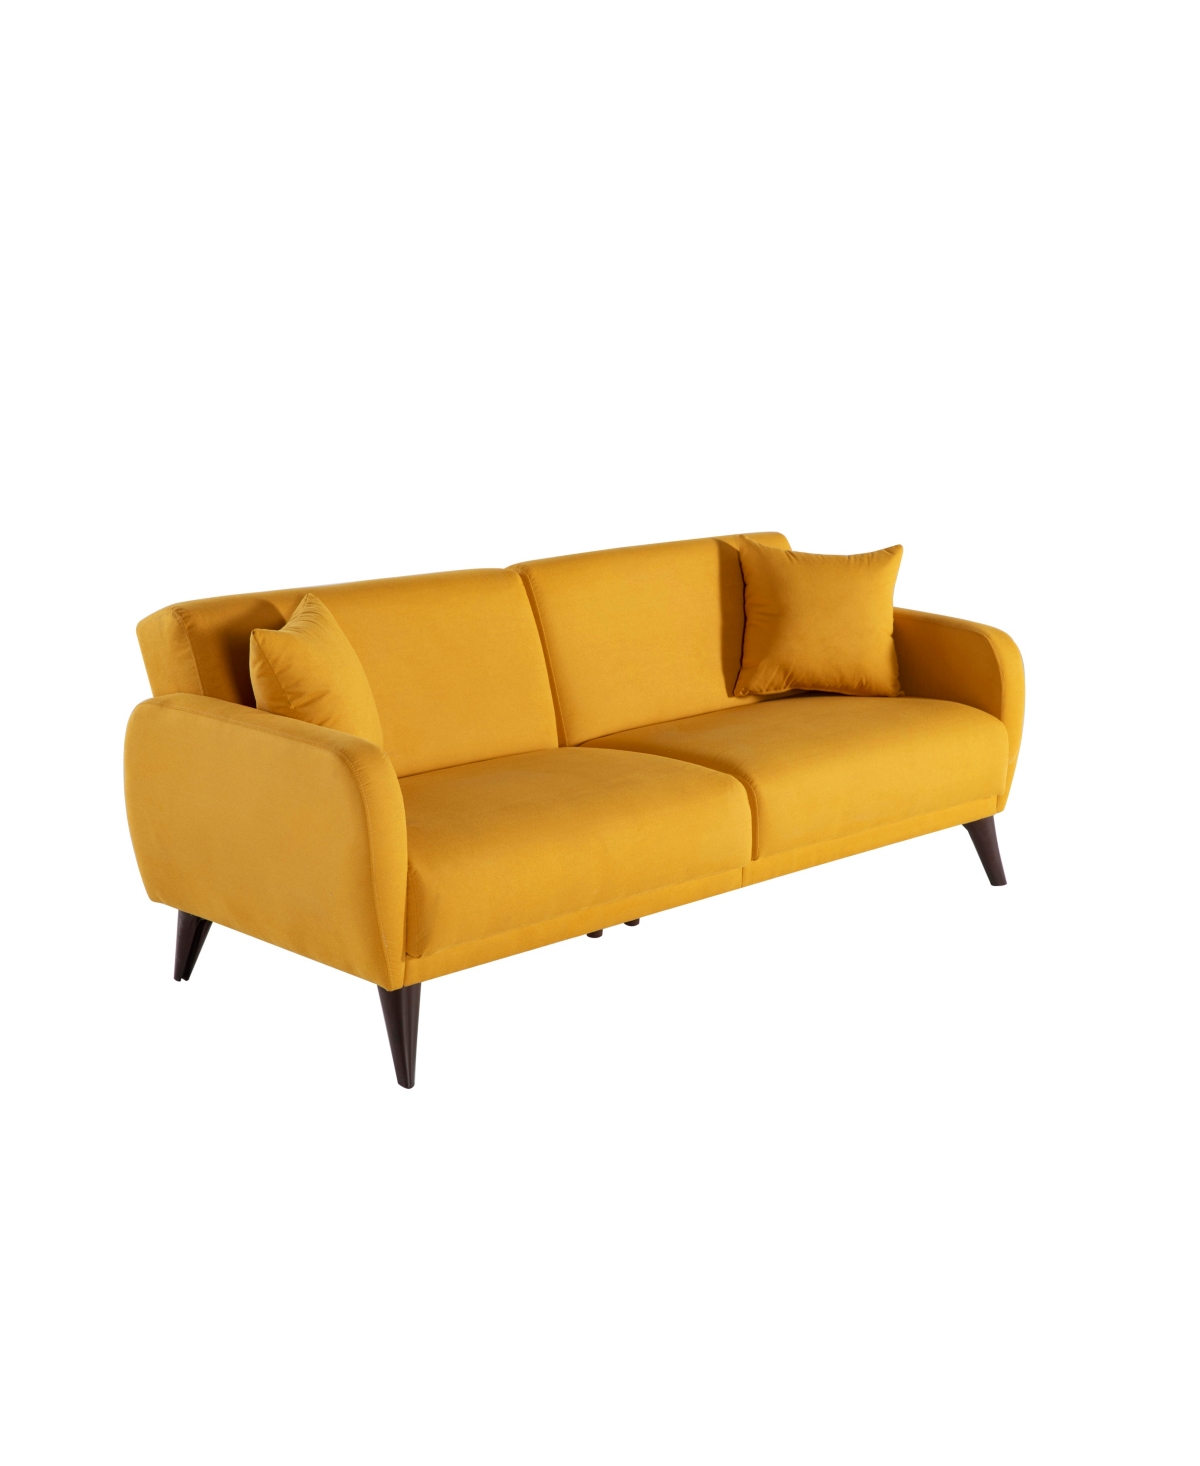 Bellona Sleeper Sofa In A Box With Storage In Yellow